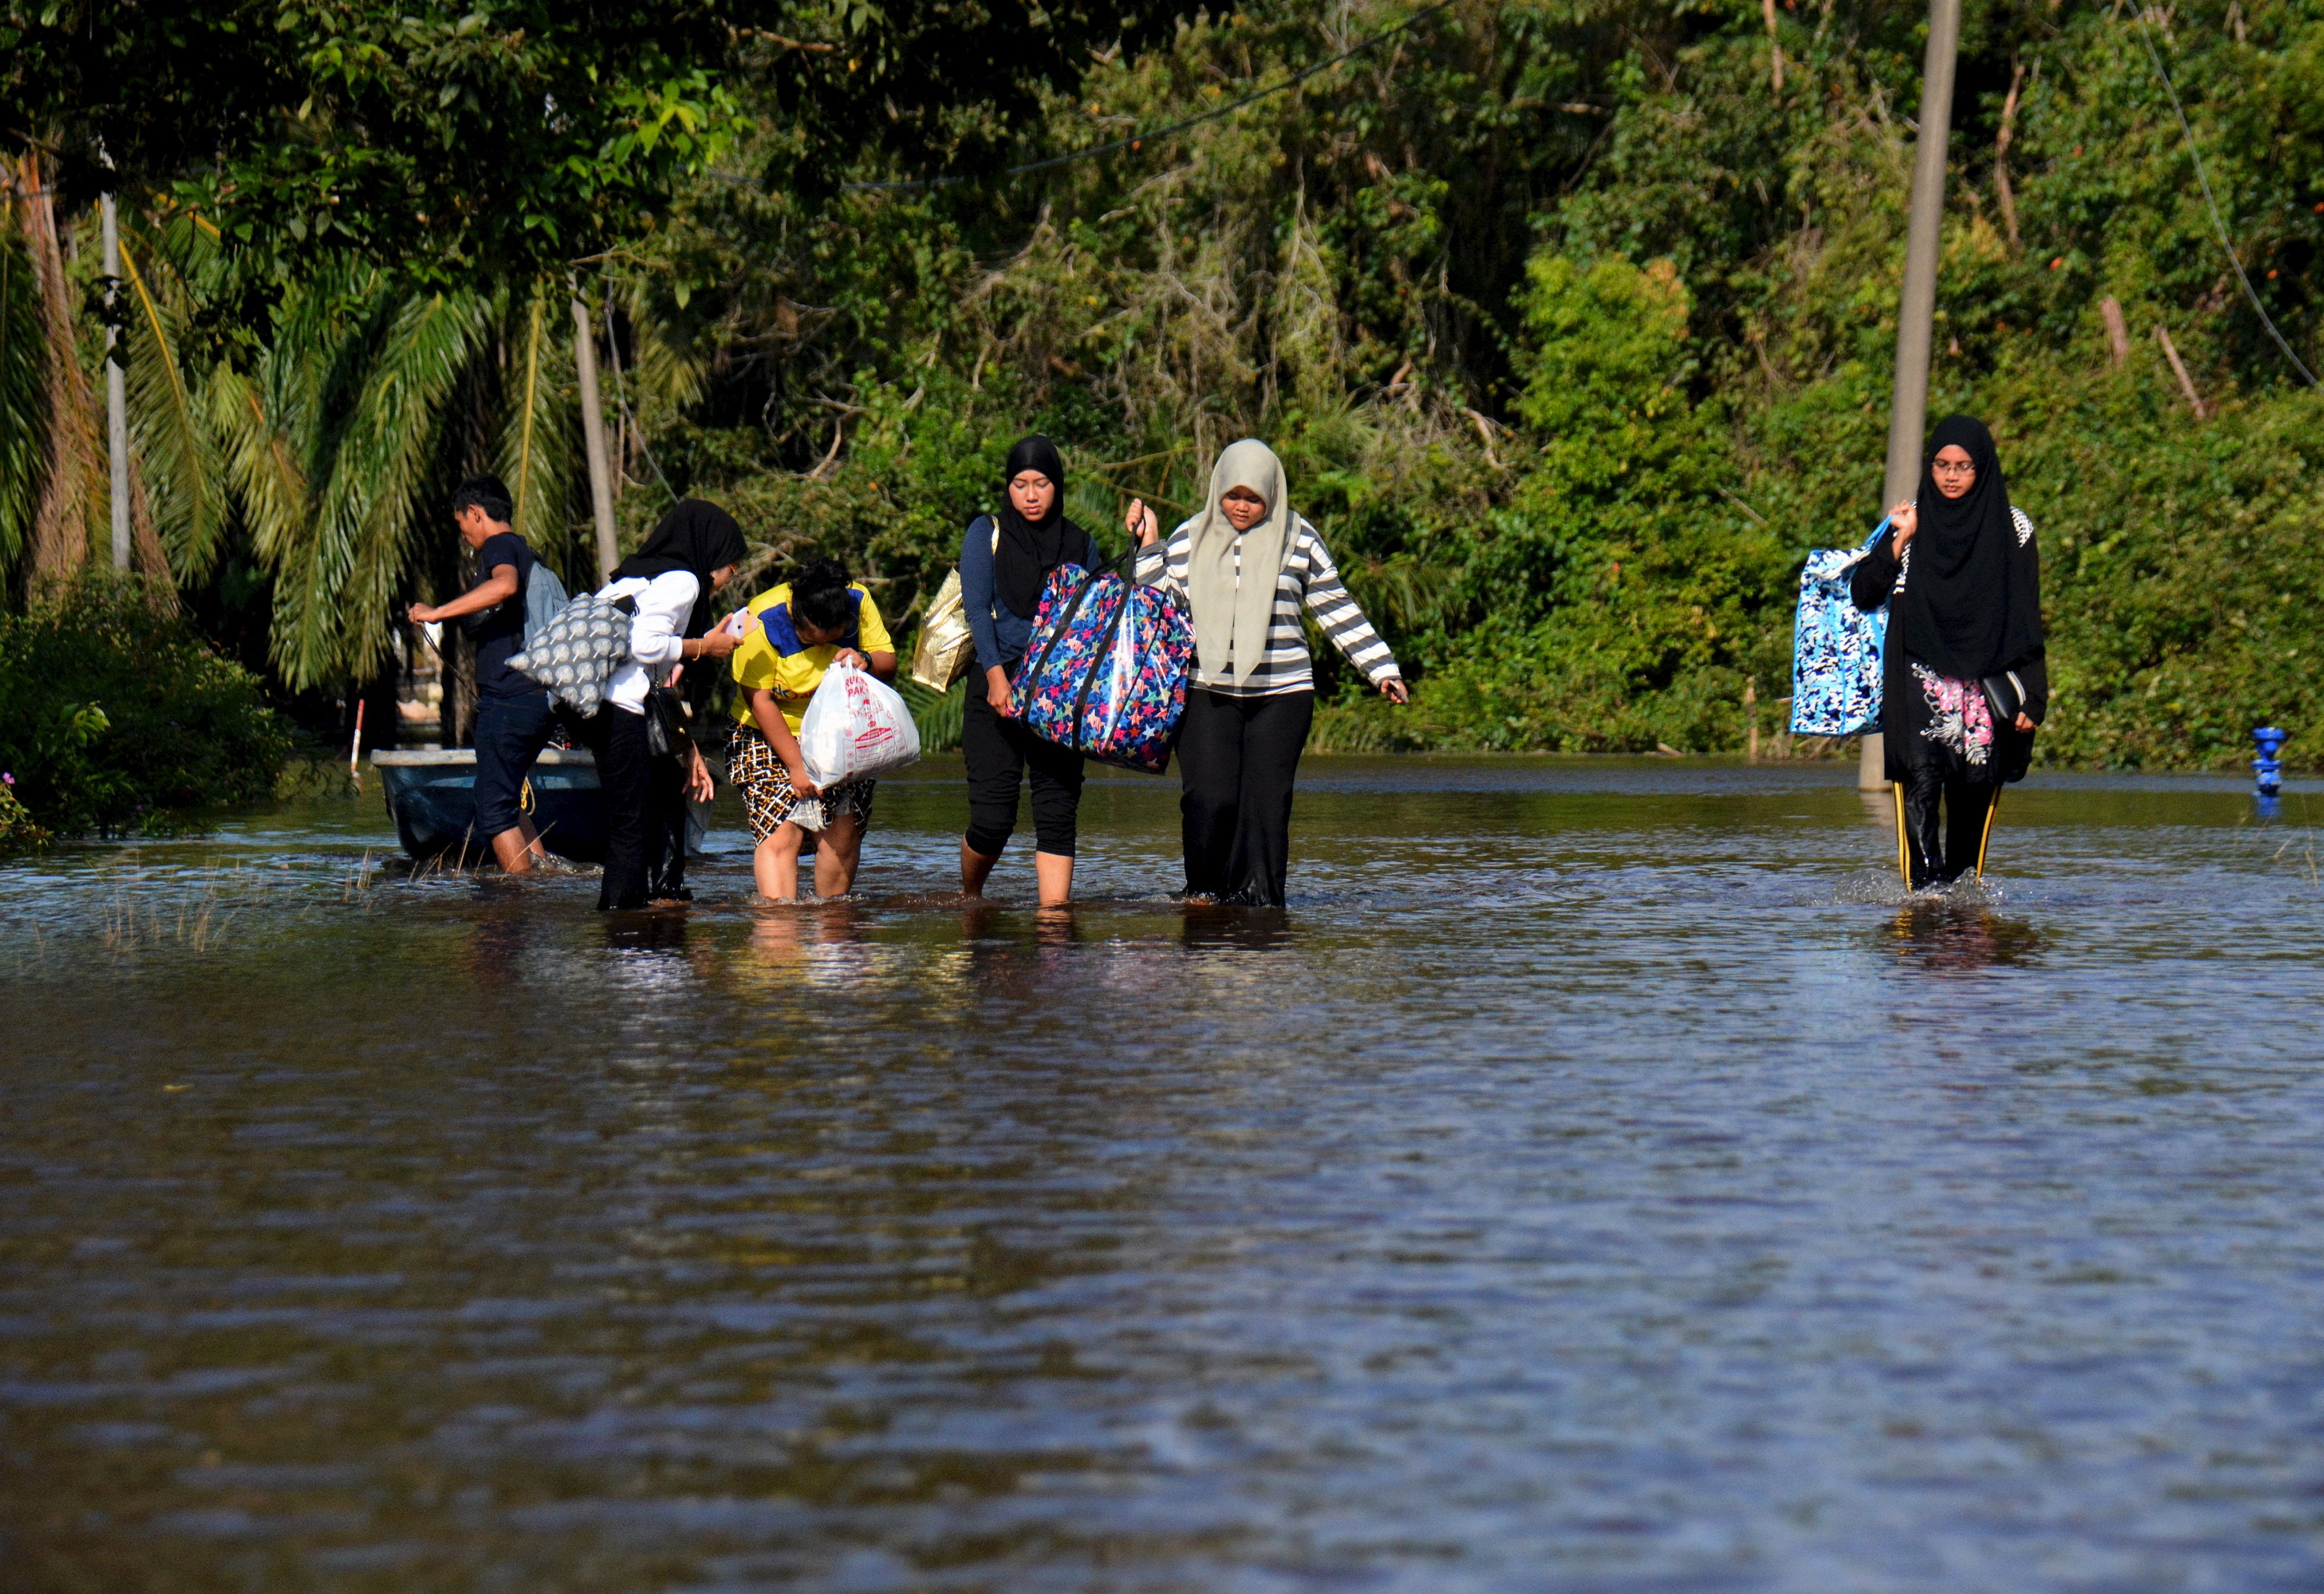 Residents walk in a flooded street in Pahang on their way to a temporary evacuation centre in December 2021. Photo: Bernama/dpa